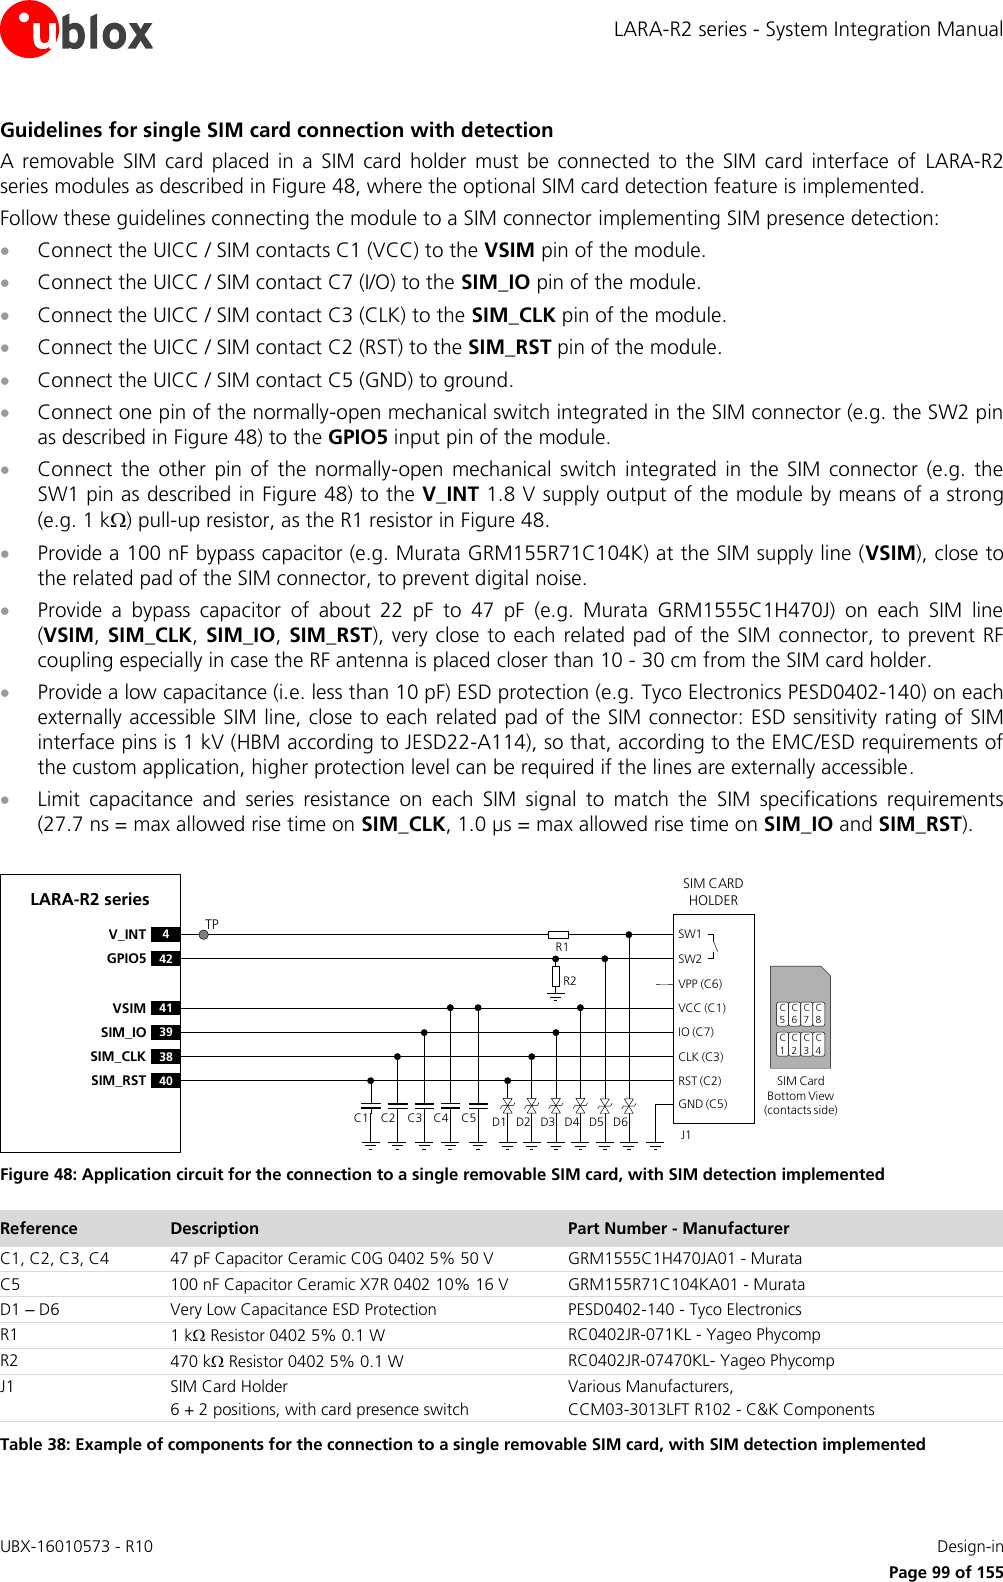 LARA-R2 series - System Integration Manual UBX-16010573 - R10    Design-in     Page 99 of 155 Guidelines for single SIM card connection with detection A  removable  SIM  card  placed  in  a  SIM  card  holder  must  be  connected  to  the  SIM  card  interface  of  LARA-R2 series modules as described in Figure 48, where the optional SIM card detection feature is implemented. Follow these guidelines connecting the module to a SIM connector implementing SIM presence detection:  Connect the UICC / SIM contacts C1 (VCC) to the VSIM pin of the module.  Connect the UICC / SIM contact C7 (I/O) to the SIM_IO pin of the module.  Connect the UICC / SIM contact C3 (CLK) to the SIM_CLK pin of the module.  Connect the UICC / SIM contact C2 (RST) to the SIM_RST pin of the module.  Connect the UICC / SIM contact C5 (GND) to ground.  Connect one pin of the normally-open mechanical switch integrated in the SIM connector (e.g. the SW2 pin as described in Figure 48) to the GPIO5 input pin of the module.  Connect  the  other  pin of  the  normally-open  mechanical  switch  integrated  in the  SIM  connector  (e.g. the SW1 pin as described in Figure 48) to the V_INT 1.8 V supply output of the module by means of a strong (e.g. 1 k) pull-up resistor, as the R1 resistor in Figure 48.  Provide a 100 nF bypass capacitor (e.g. Murata GRM155R71C104K) at the SIM supply line (VSIM), close to the related pad of the SIM connector, to prevent digital noise.   Provide  a  bypass  capacitor  of  about  22  pF  to  47  pF  (e.g.  Murata  GRM1555C1H470J)  on  each  SIM  line (VSIM, SIM_CLK,  SIM_IO, SIM_RST), very close to each related pad of the SIM connector, to prevent RF coupling especially in case the RF antenna is placed closer than 10 - 30 cm from the SIM card holder.  Provide a low capacitance (i.e. less than 10 pF) ESD protection (e.g. Tyco Electronics PESD0402-140) on each externally accessible SIM line, close to each related pad of the SIM connector: ESD sensitivity rating of SIM interface pins is 1 kV (HBM according to JESD22-A114), so that, according to the EMC/ESD requirements of the custom application, higher protection level can be required if the lines are externally accessible.   Limit  capacitance  and  series  resistance  on  each  SIM  signal  to  match  the  SIM  specifications  requirements (27.7 ns = max allowed rise time on SIM_CLK, 1.0 µs = max allowed rise time on SIM_IO and SIM_RST).  LARA-R2 series41VSIM39SIM_IO38SIM_CLK40SIM_RST4V_INT42GPIO5SIM CARD HOLDERC5C6C7C1C2C3SIM Card Bottom View (contacts side)C1VPP (C6)VCC (C1)IO (C7)CLK (C3)RST (C2)GND (C5)C2 C3 C5J1C4SW1SW2D1 D2 D3 D4 D5 D6R2R1C8C4TP Figure 48: Application circuit for the connection to a single removable SIM card, with SIM detection implemented Reference Description Part Number - Manufacturer C1, C2, C3, C4 47 pF Capacitor Ceramic C0G 0402 5% 50 V GRM1555C1H470JA01 - Murata C5 100 nF Capacitor Ceramic X7R 0402 10% 16 V GRM155R71C104KA01 - Murata D1 – D6 Very Low Capacitance ESD Protection PESD0402-140 - Tyco Electronics  R1 1 k Resistor 0402 5% 0.1 W RC0402JR-071KL - Yageo Phycomp R2 470 k Resistor 0402 5% 0.1 W RC0402JR-07470KL- Yageo Phycomp J1 SIM Card Holder 6 + 2 positions, with card presence switch Various Manufacturers, CCM03-3013LFT R102 - C&amp;K Components Table 38: Example of components for the connection to a single removable SIM card, with SIM detection implemented  